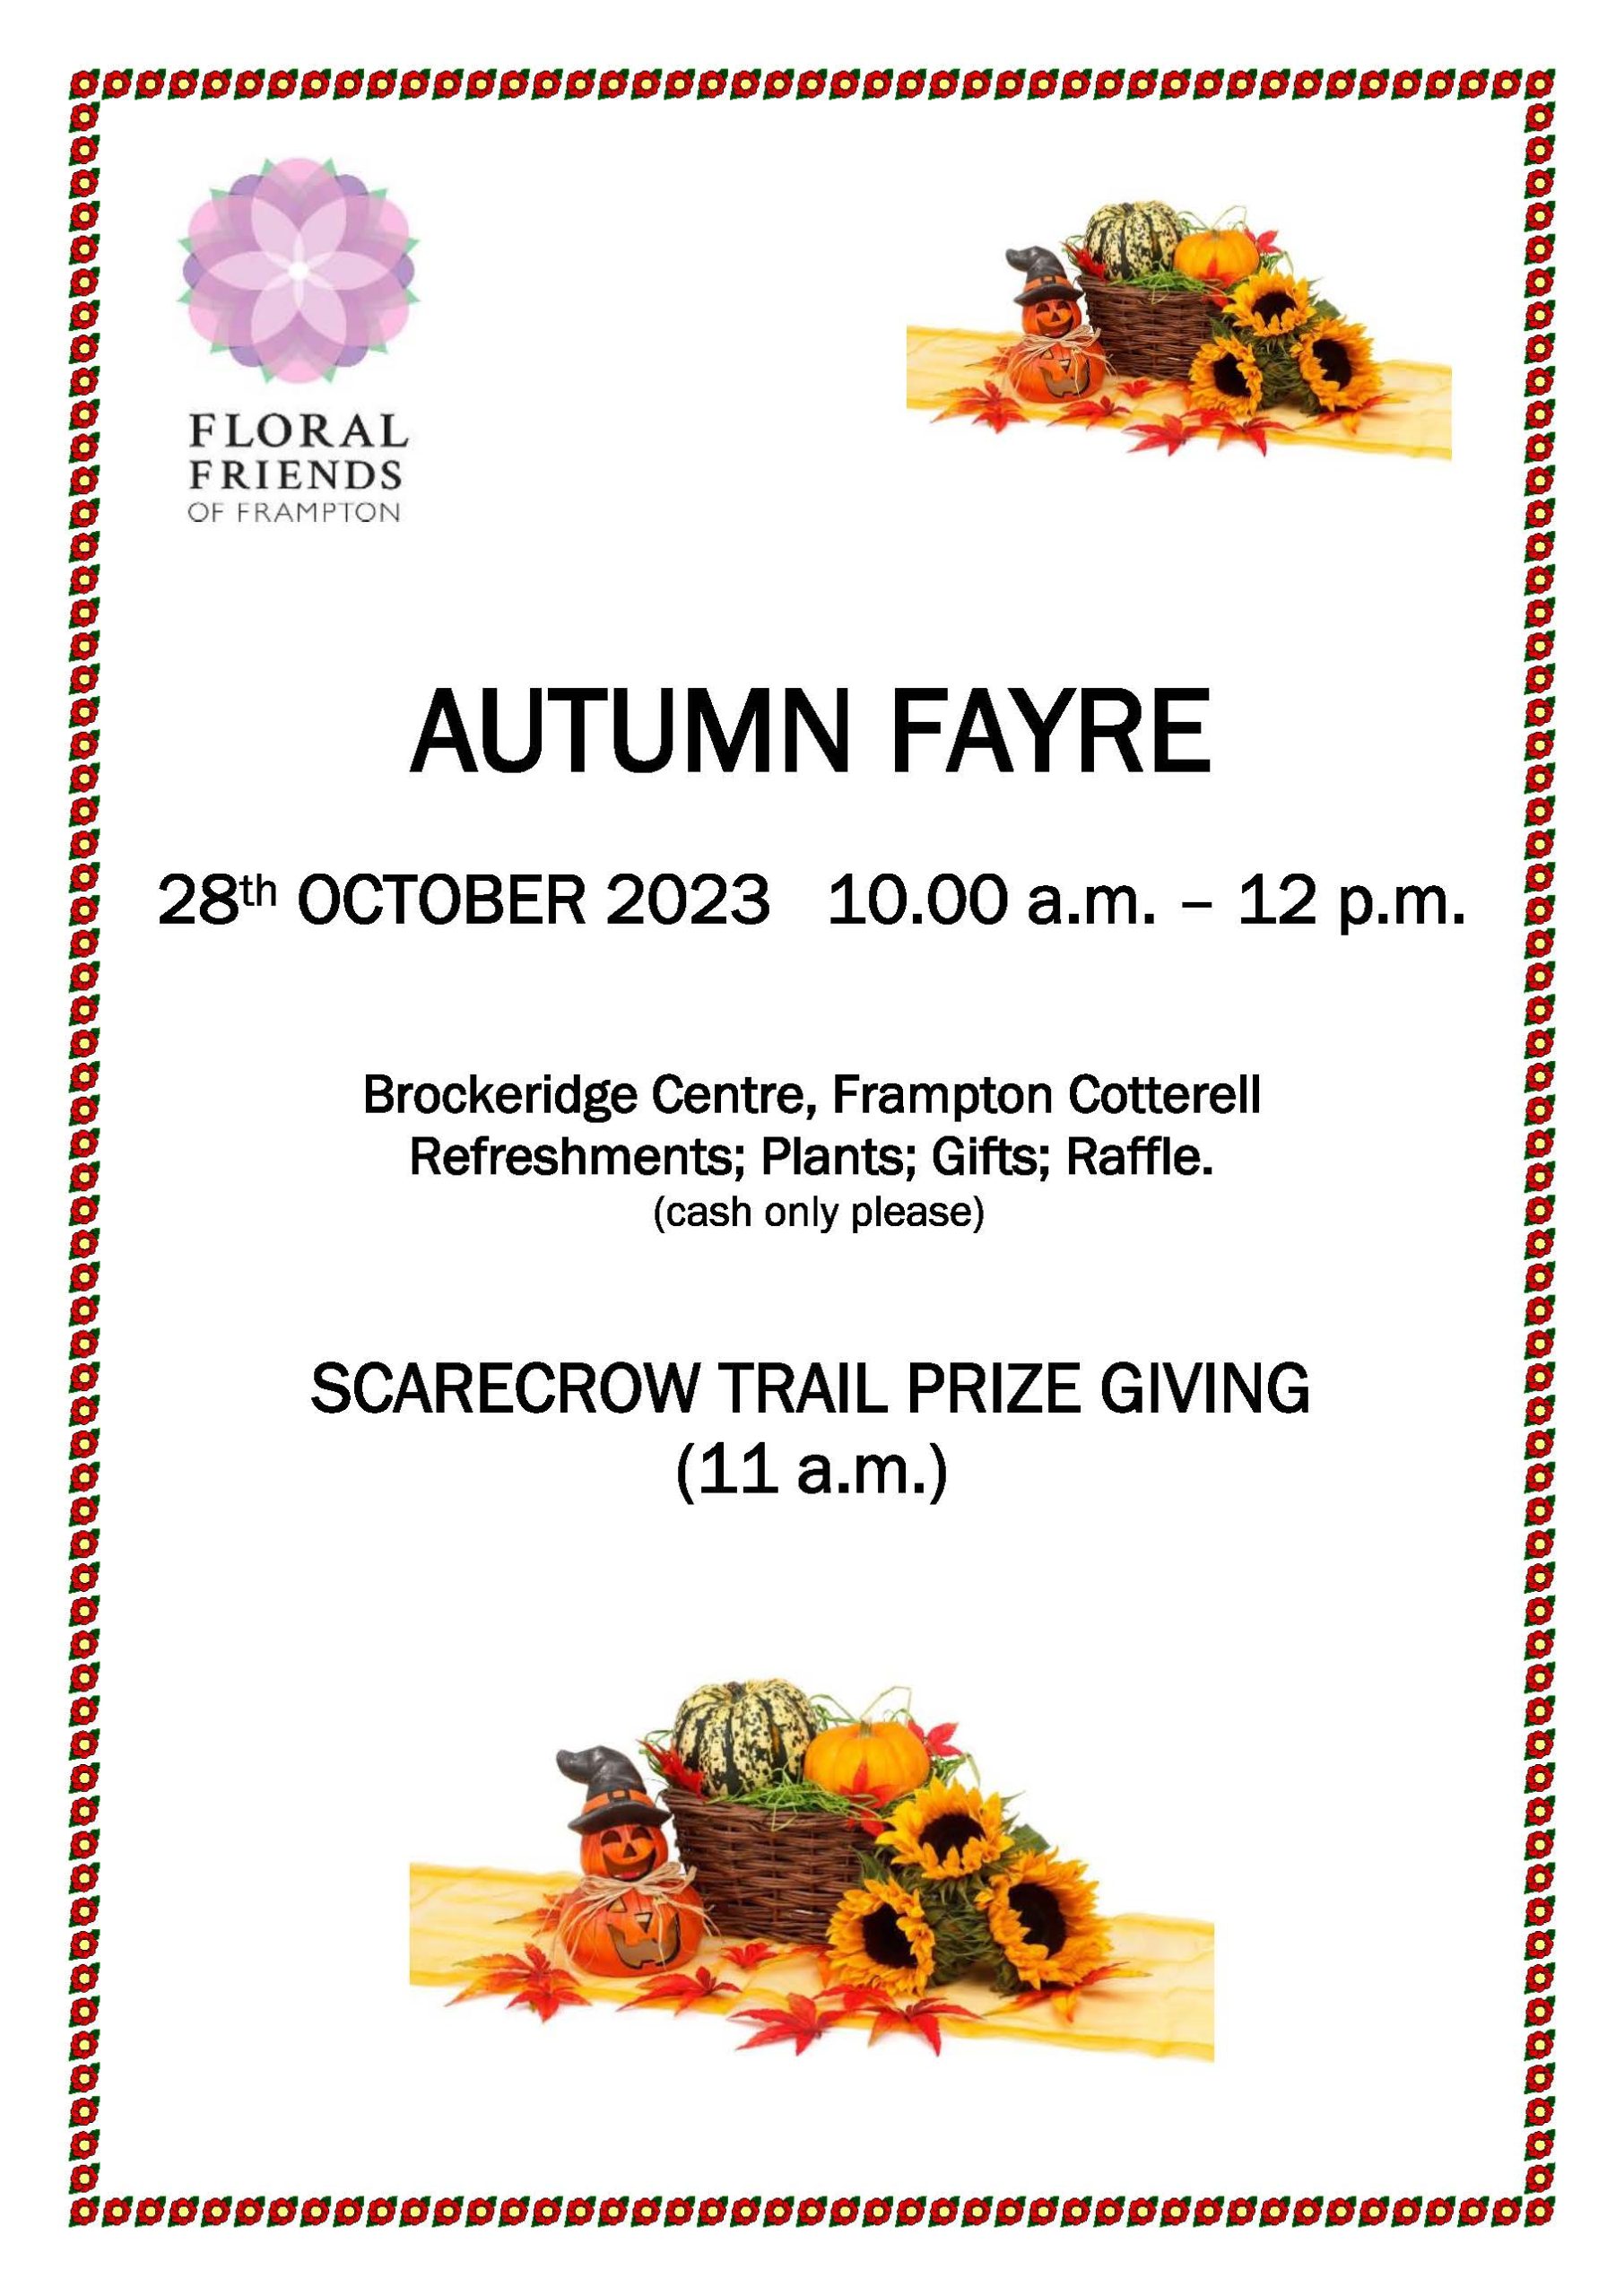 "Floral Friends of Frampton AUTUMN FAYRE 28th OCTOBER 2023 10.00 a.m. – 12 p.m. Brockeridge Centre, Frampton Cotterell Refreshments; Plants; Gifts; Raffle. (cash only please) SCARECROW TRAIL PRIZE GIVING (11 a.m.)"